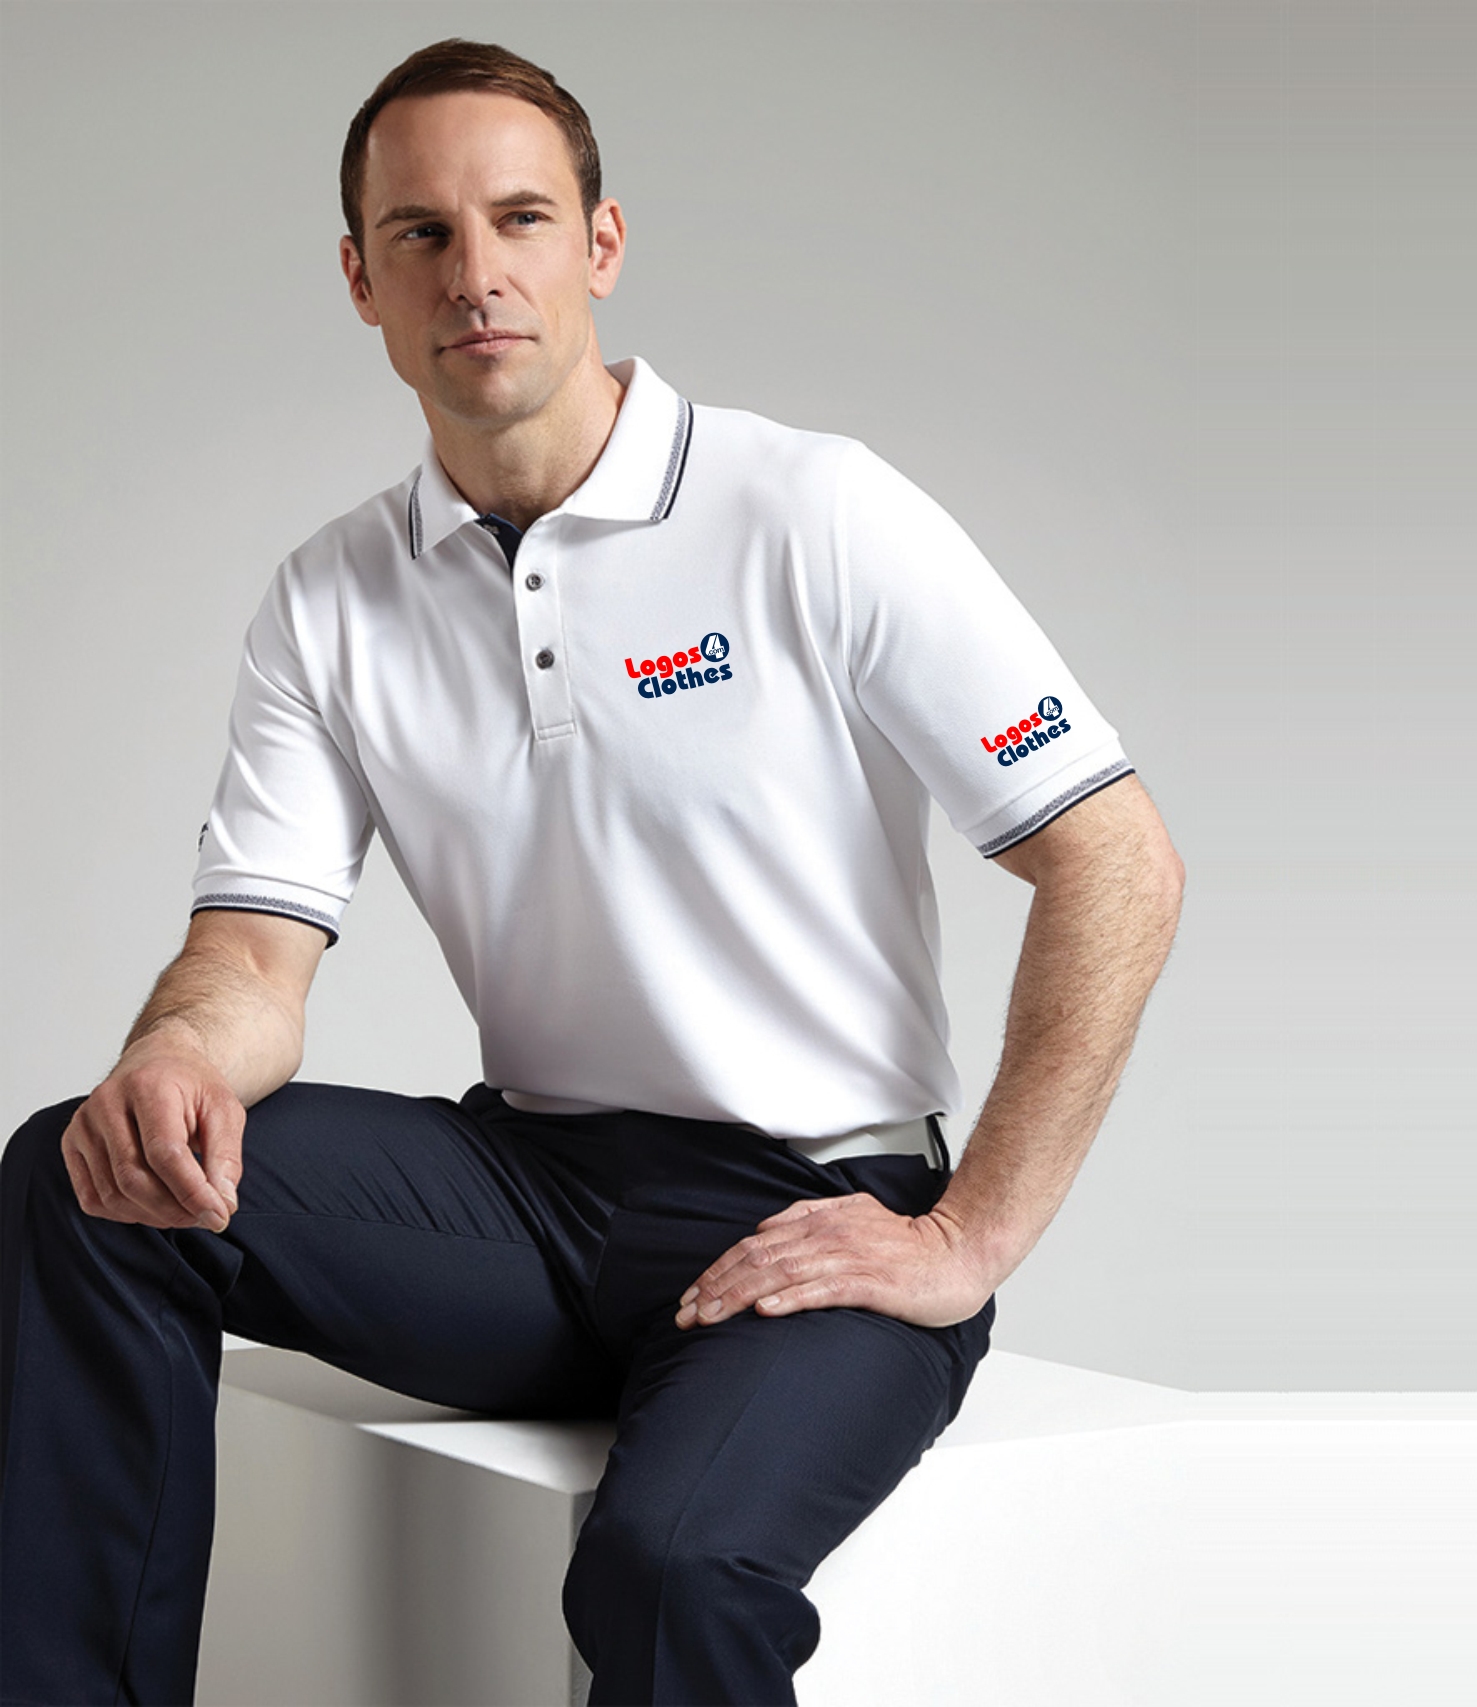 Polo Shirts for Golf Promote Your Brand - Logos 4 Clothes Blog